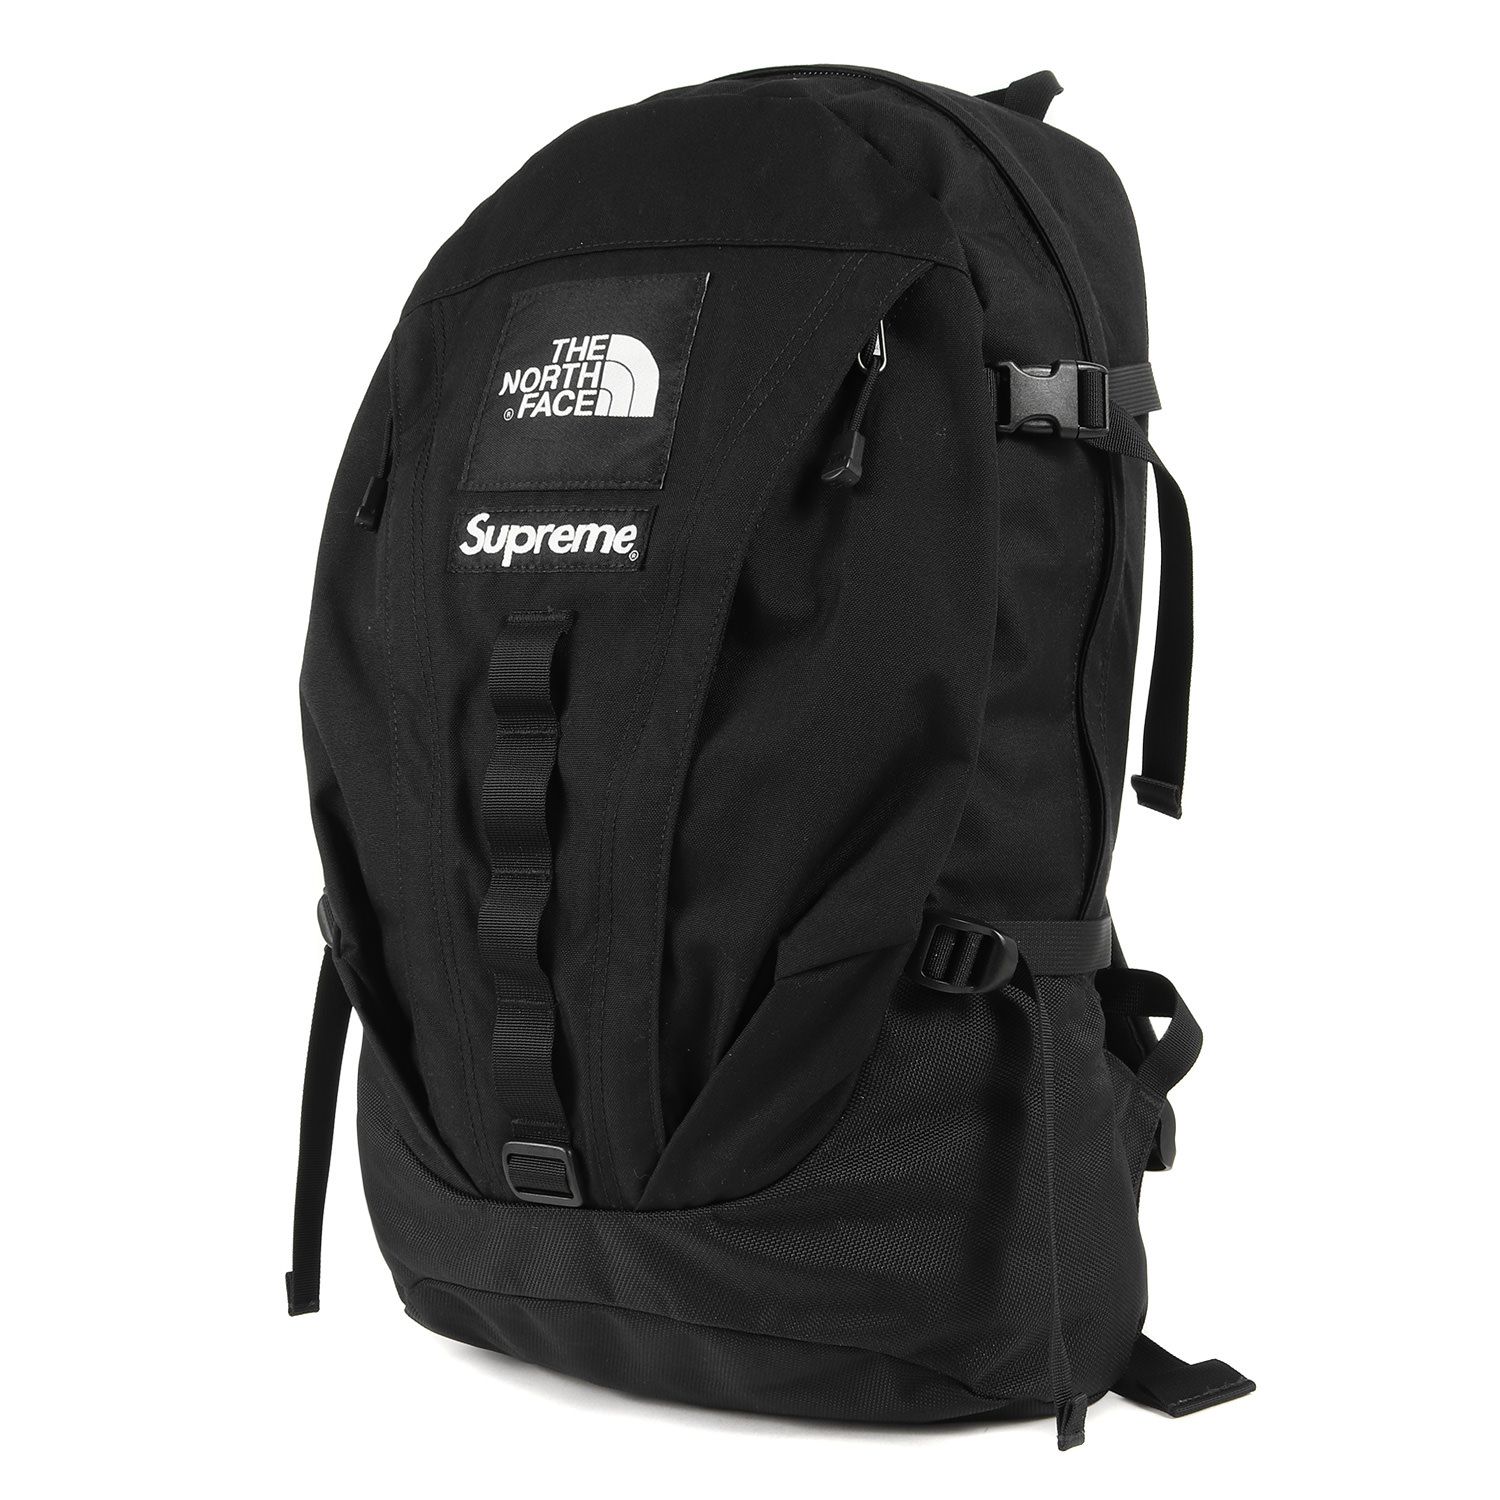 Supreme シュプリーム バックパック 18AW × THE NORTH FACE ノースフェイス Expedition Backpack エクスペディション バックパック リュック